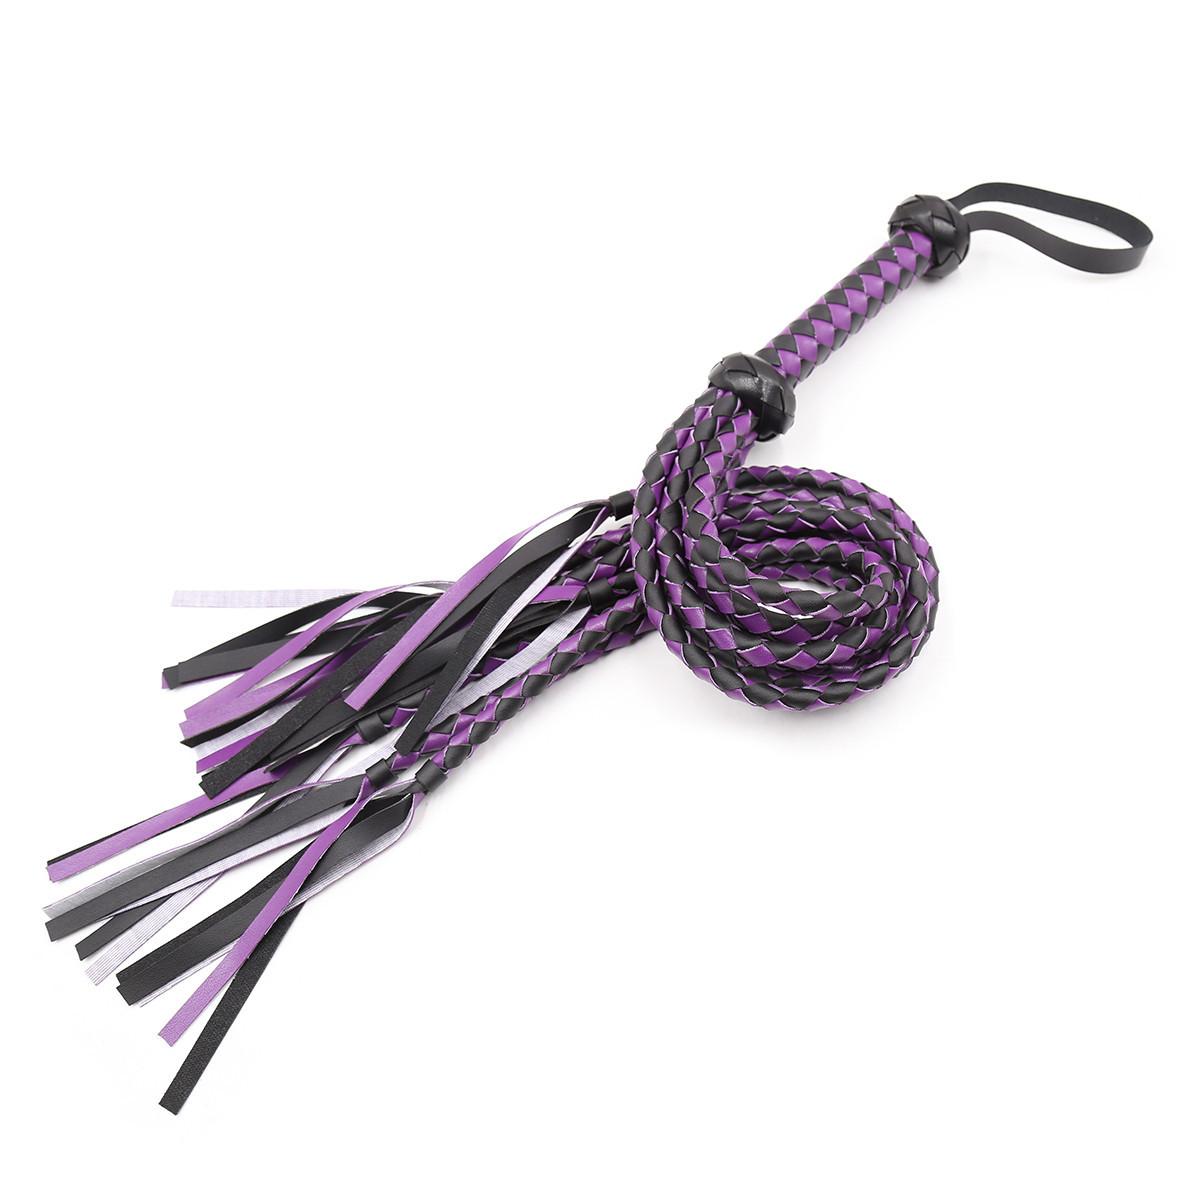 PU leather whip, SM toy, loose whip, adult toys